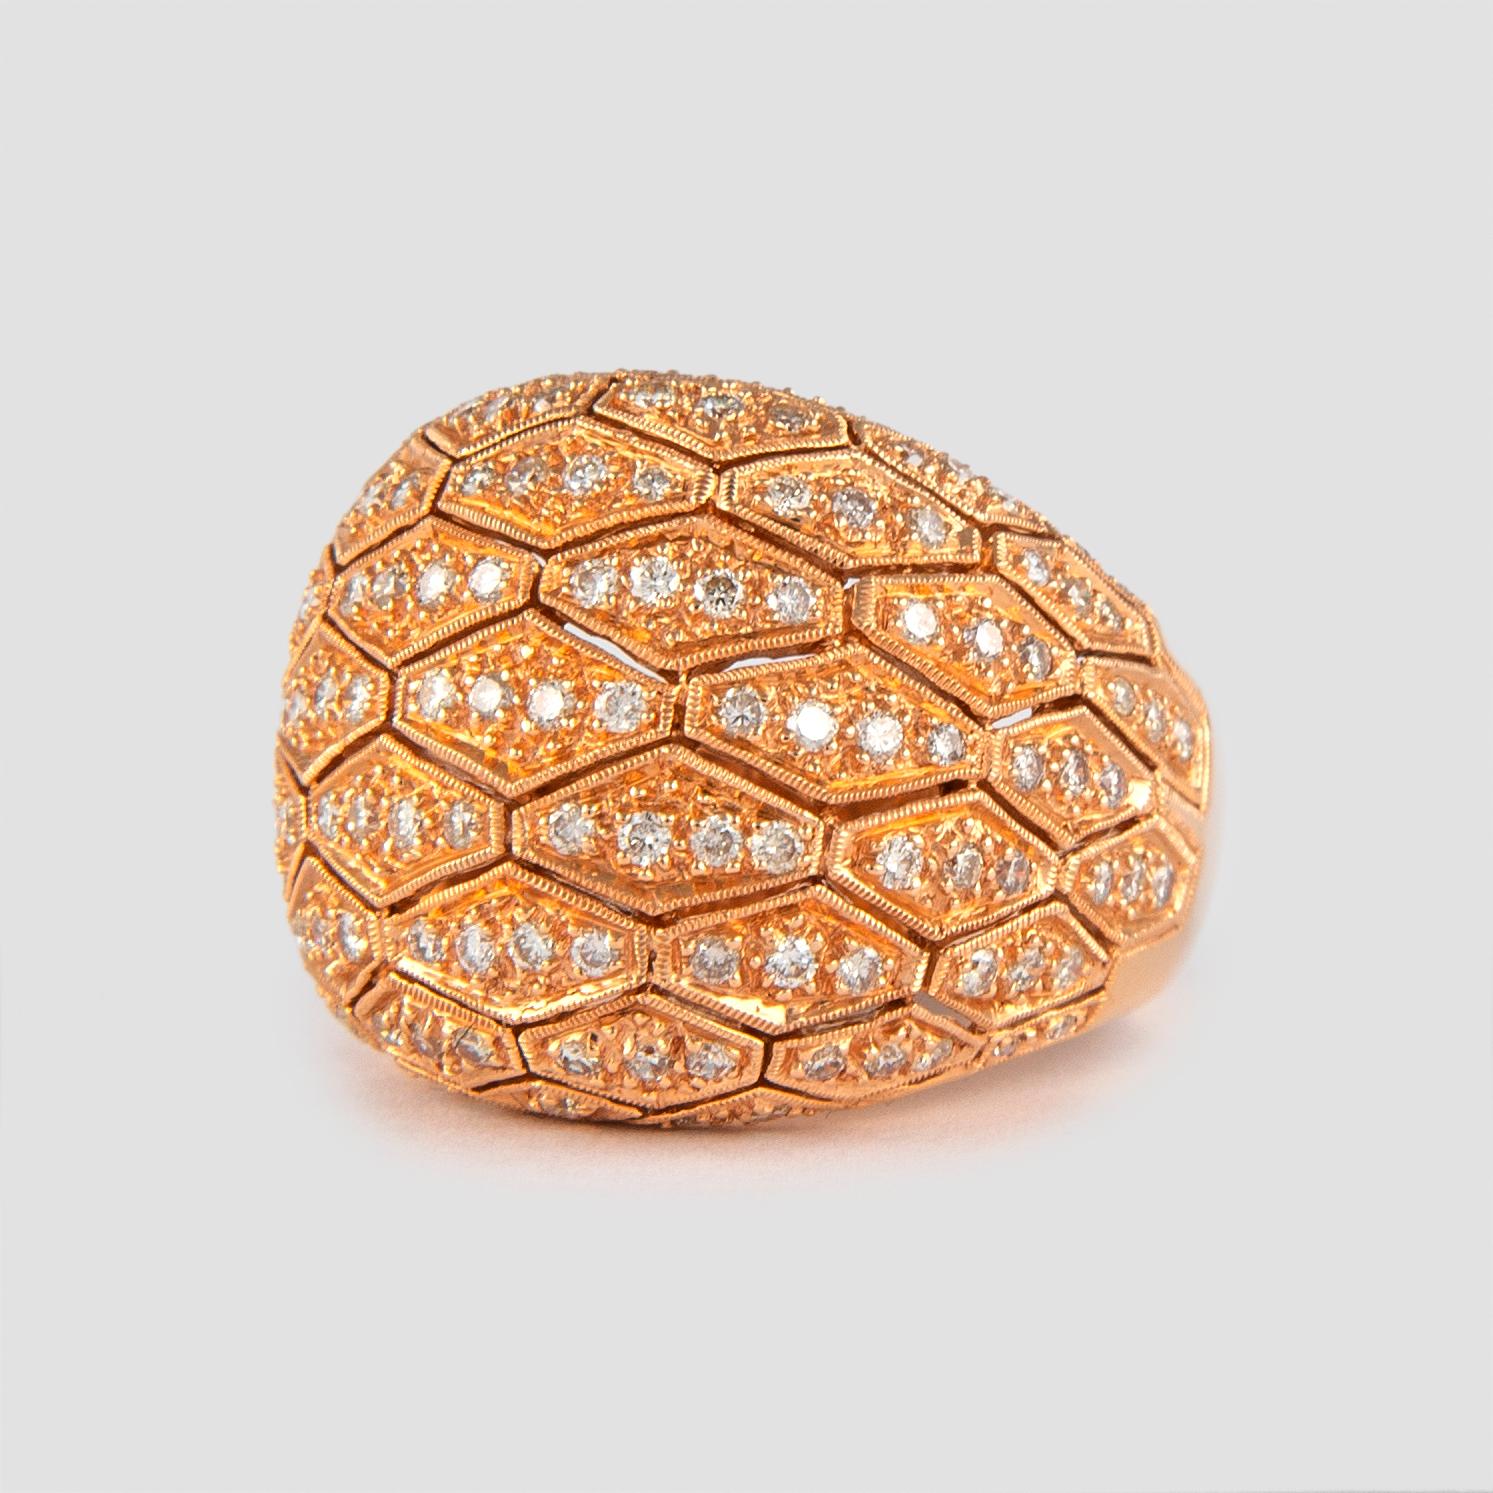 Contemporary 1.15 Carat Domed Diamond Patterned and 18 Karat Rose Gold Cocktail Ring For Sale